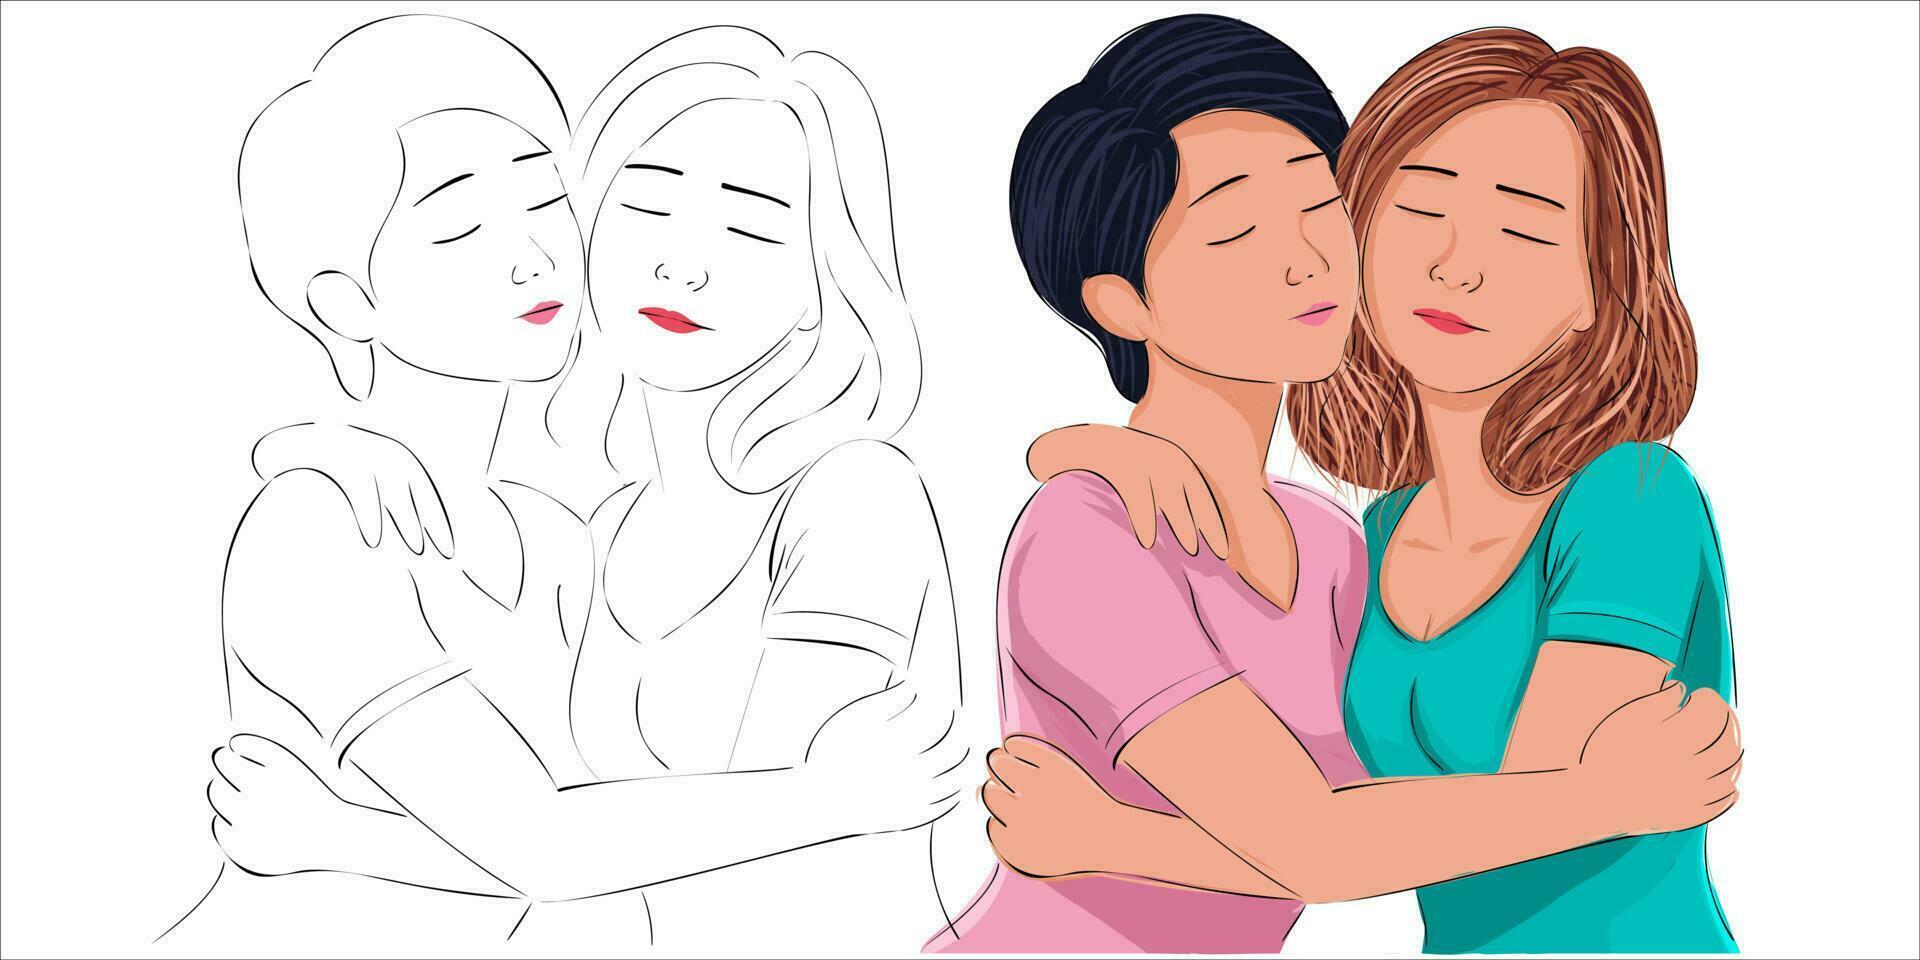 Asian European Lesbian couple flat design illustration. Portrait of two beautiful girls in an intimate abstraction